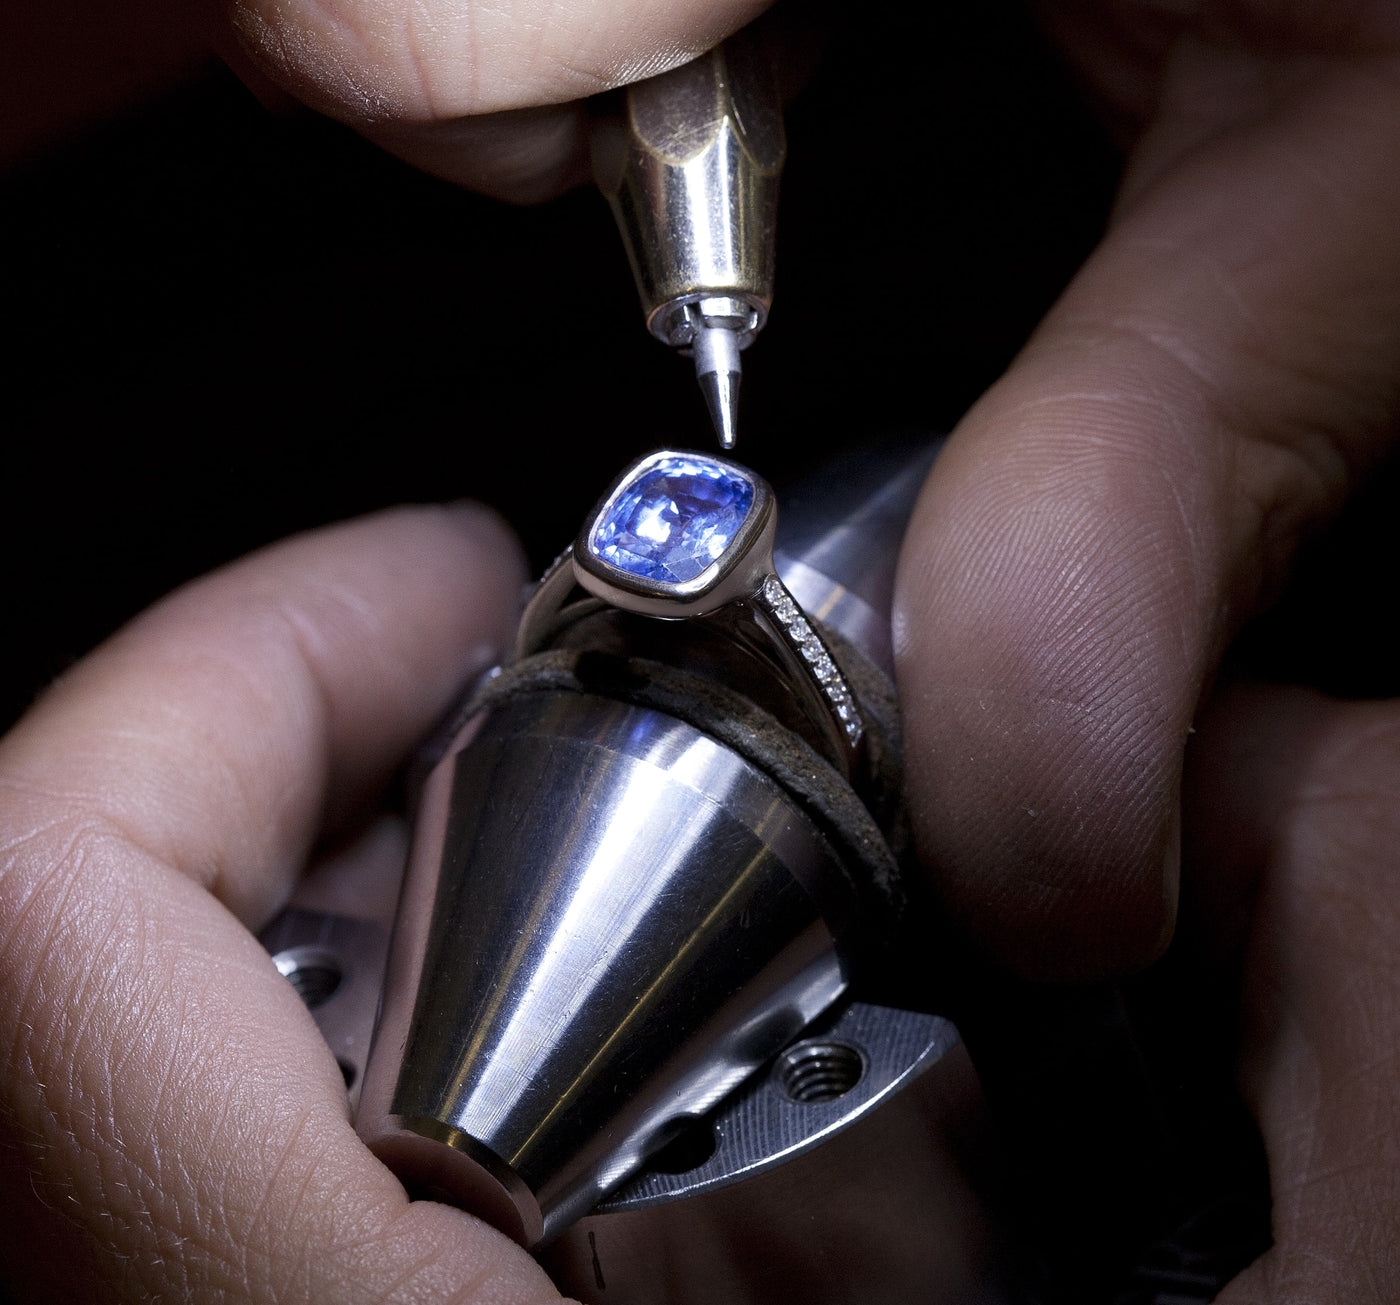 Let's talk about sustainably sourcing our gemstones & diamonds